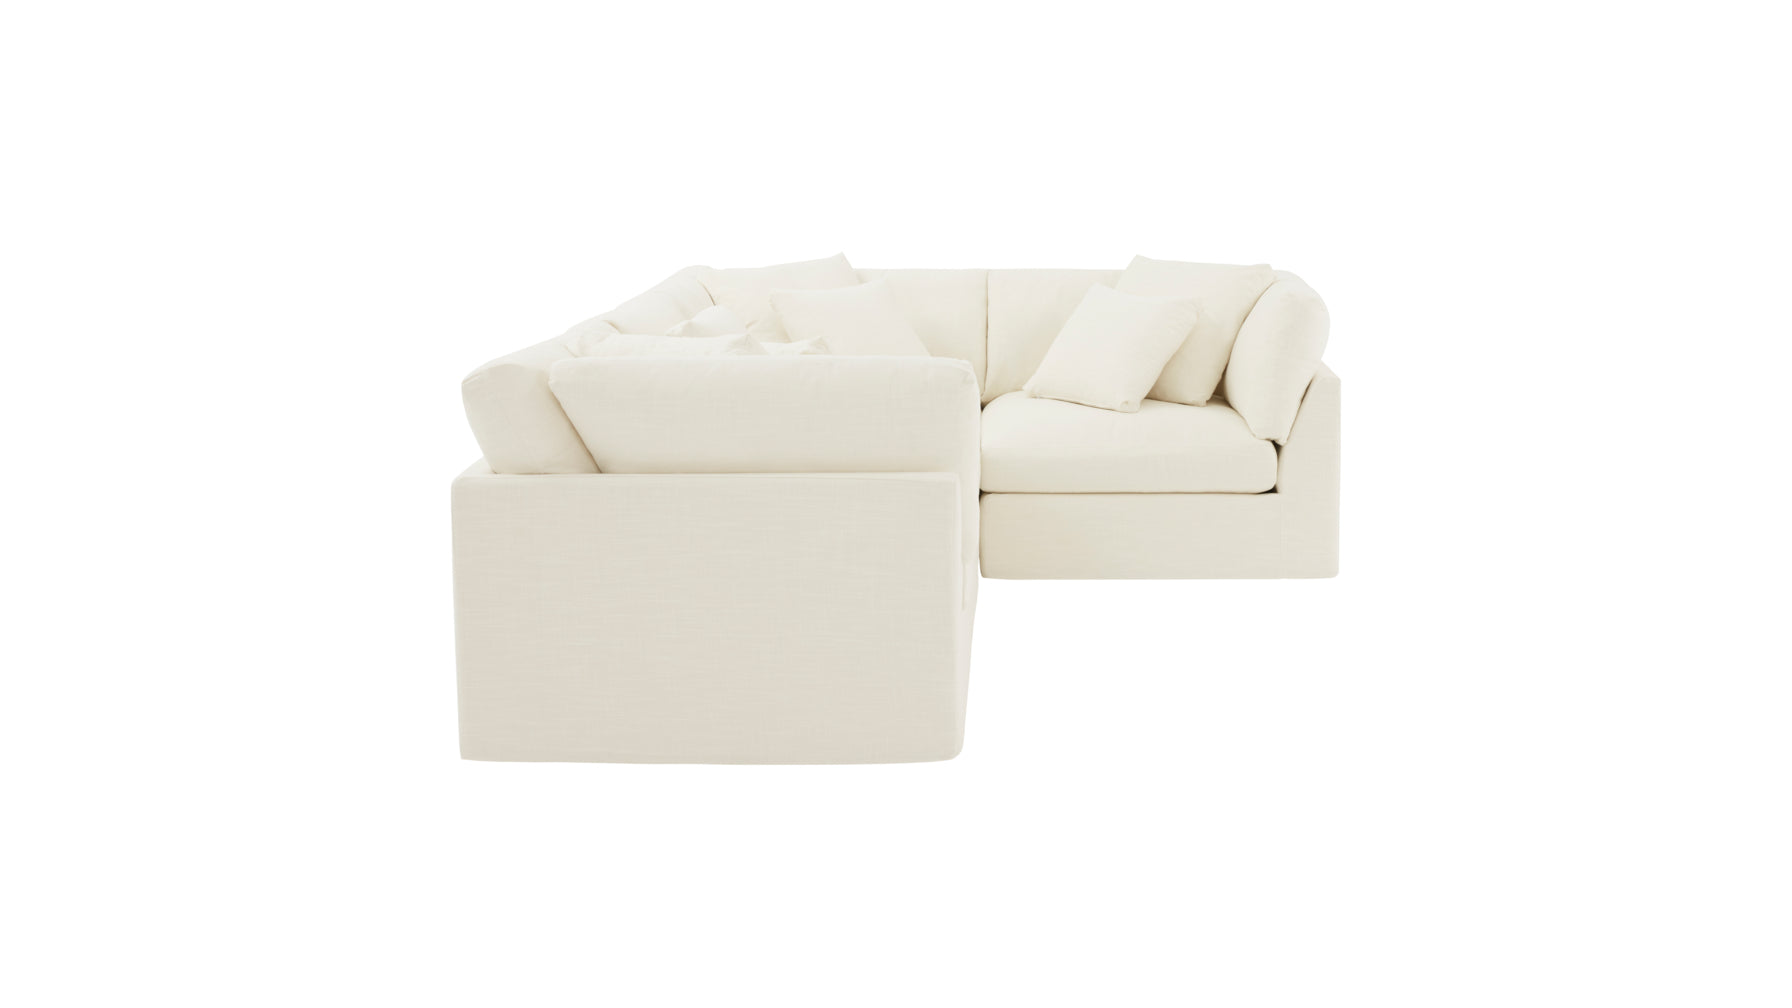 Get Together™ 4-Piece Modular Sectional Closed, Large, Cream Linen - Image 6